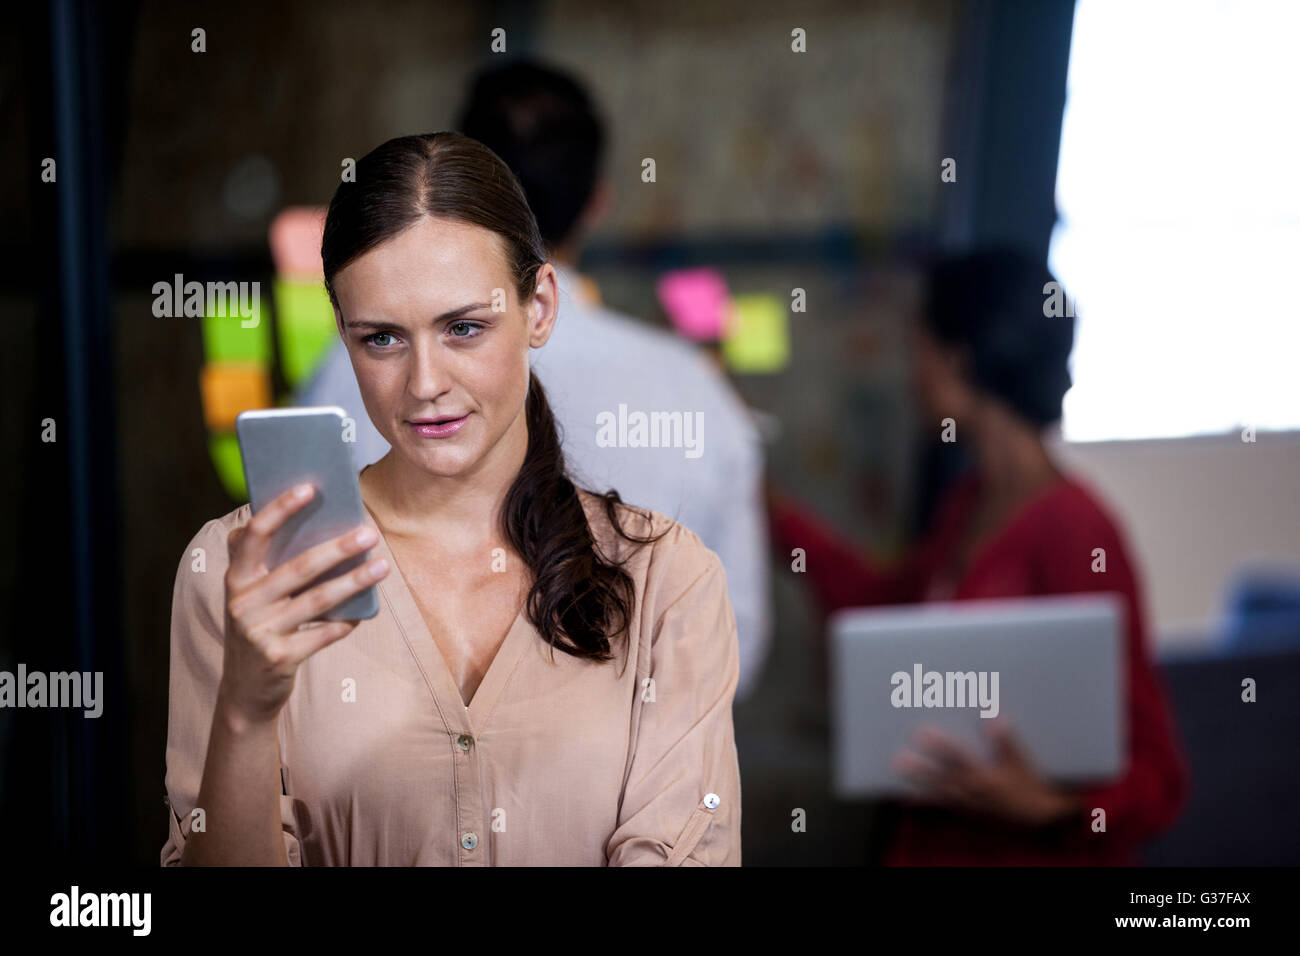 Focus on foreground of woman looking her mobile phone Stock Photo